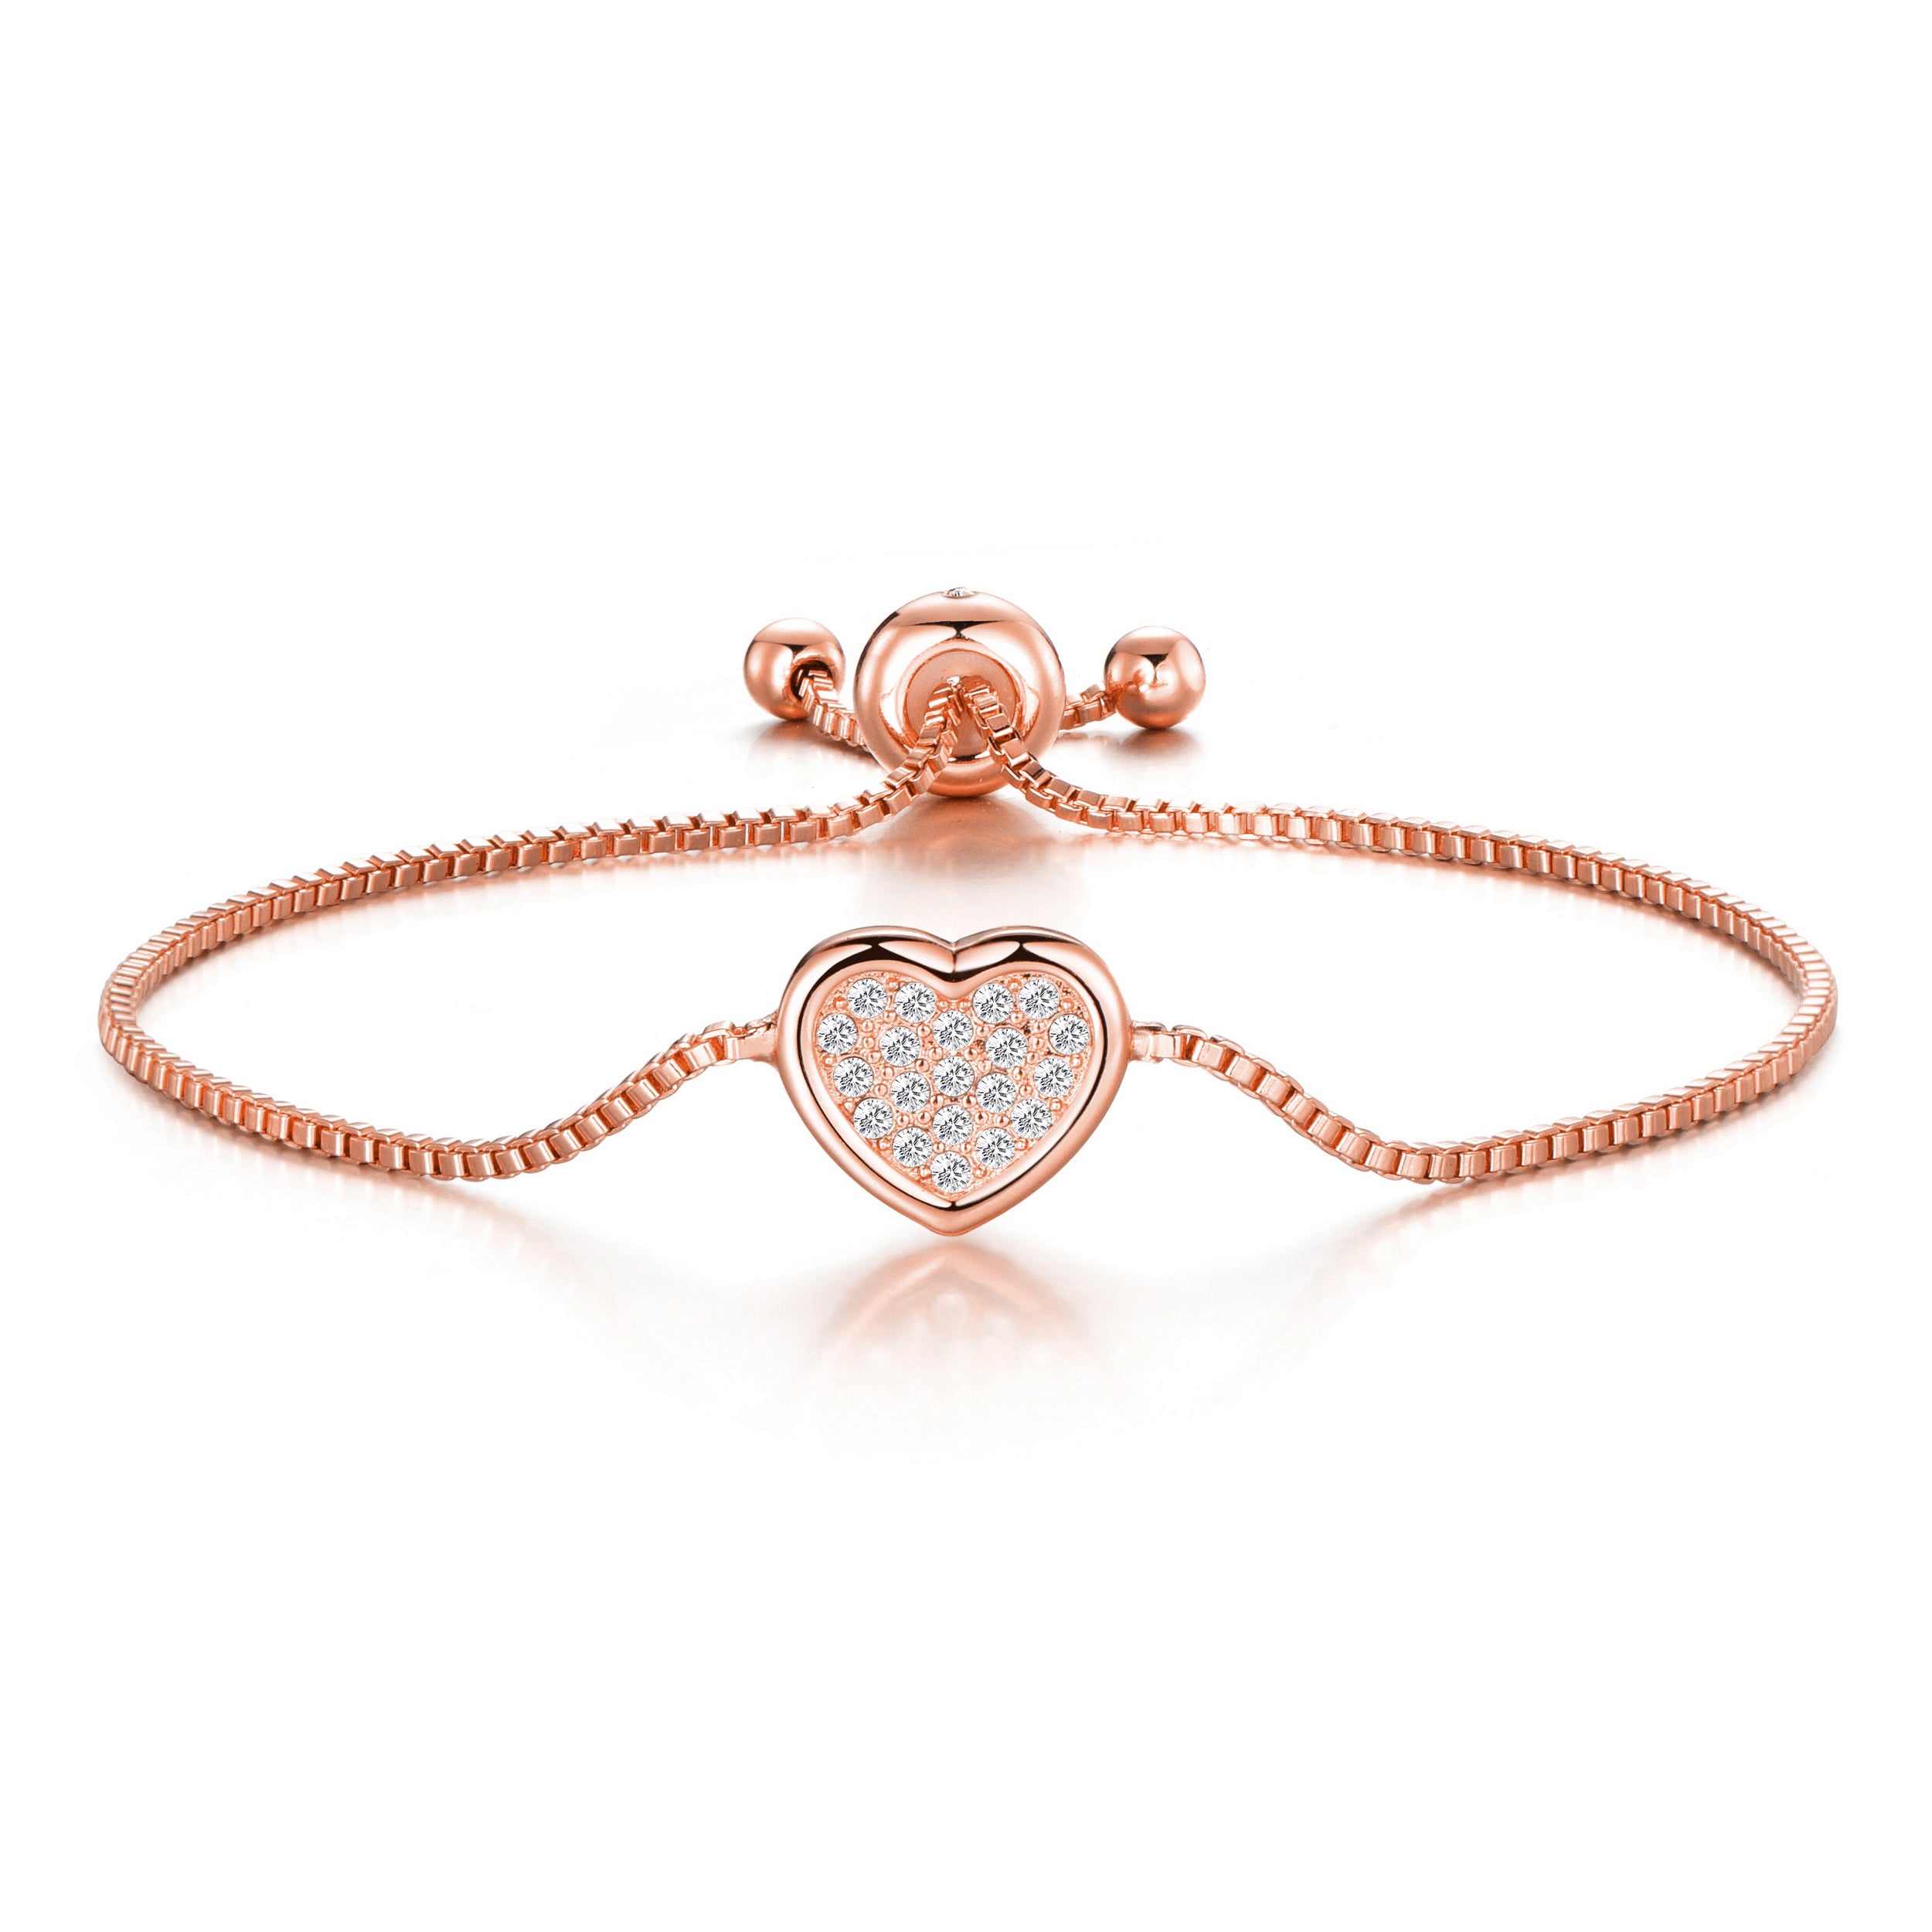 Rose Gold Plated Pave Heart Friendship Bracelet Created with Zircondia® Crystals by Philip Jones Jewellery